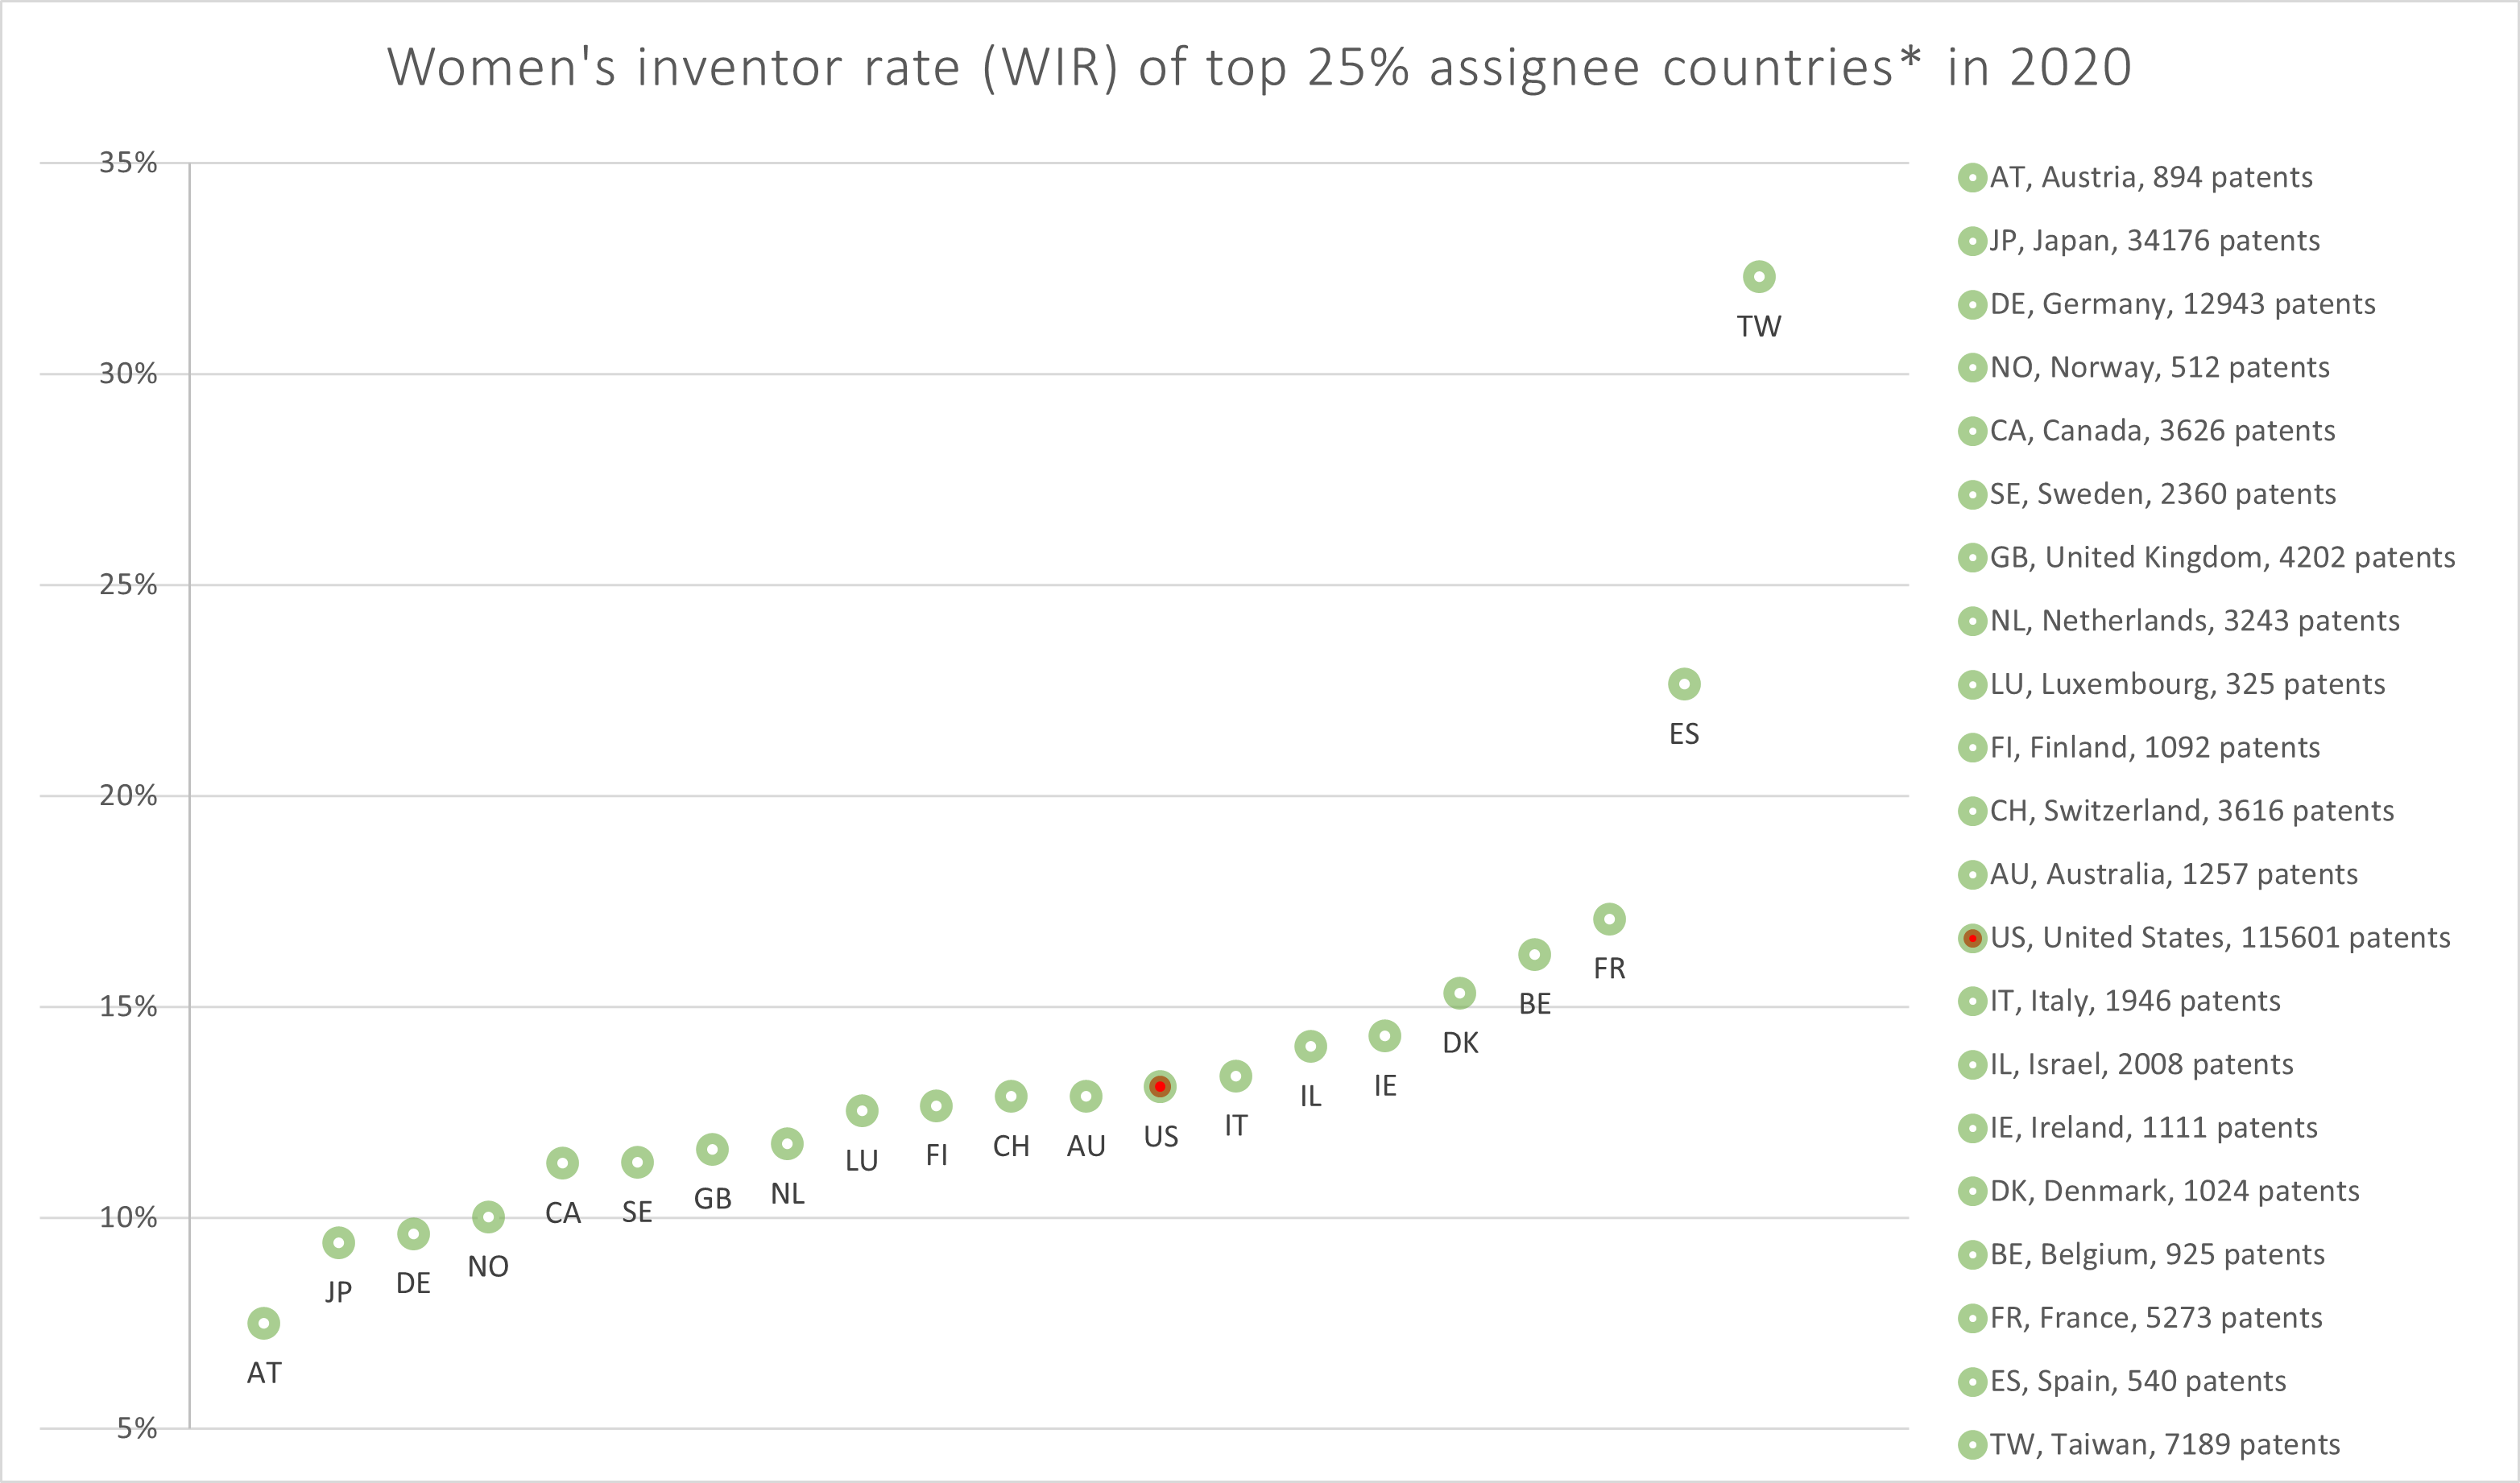 bar graph showing the top 25% of countries with high WIR in their assignees